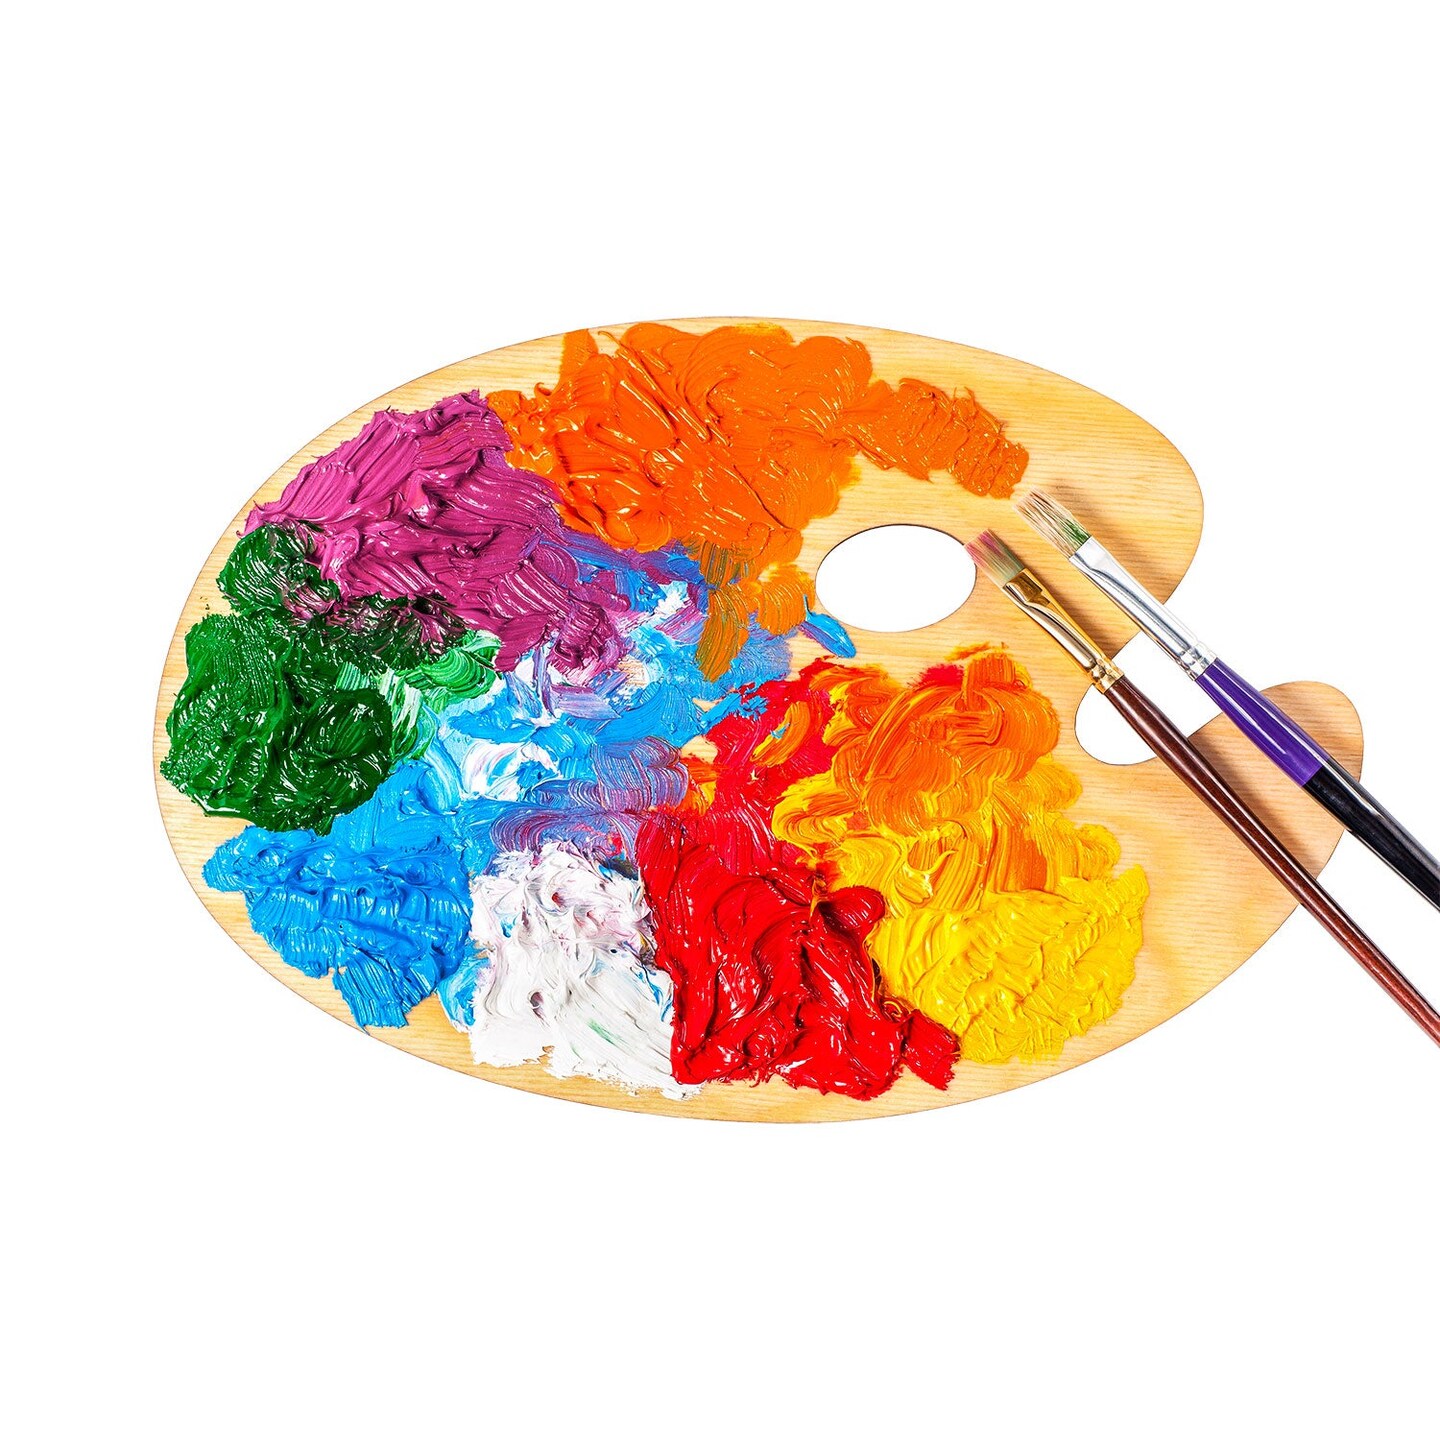 18-Well Portable Paint Palette with Lid, 2 Paint Brushes, 10